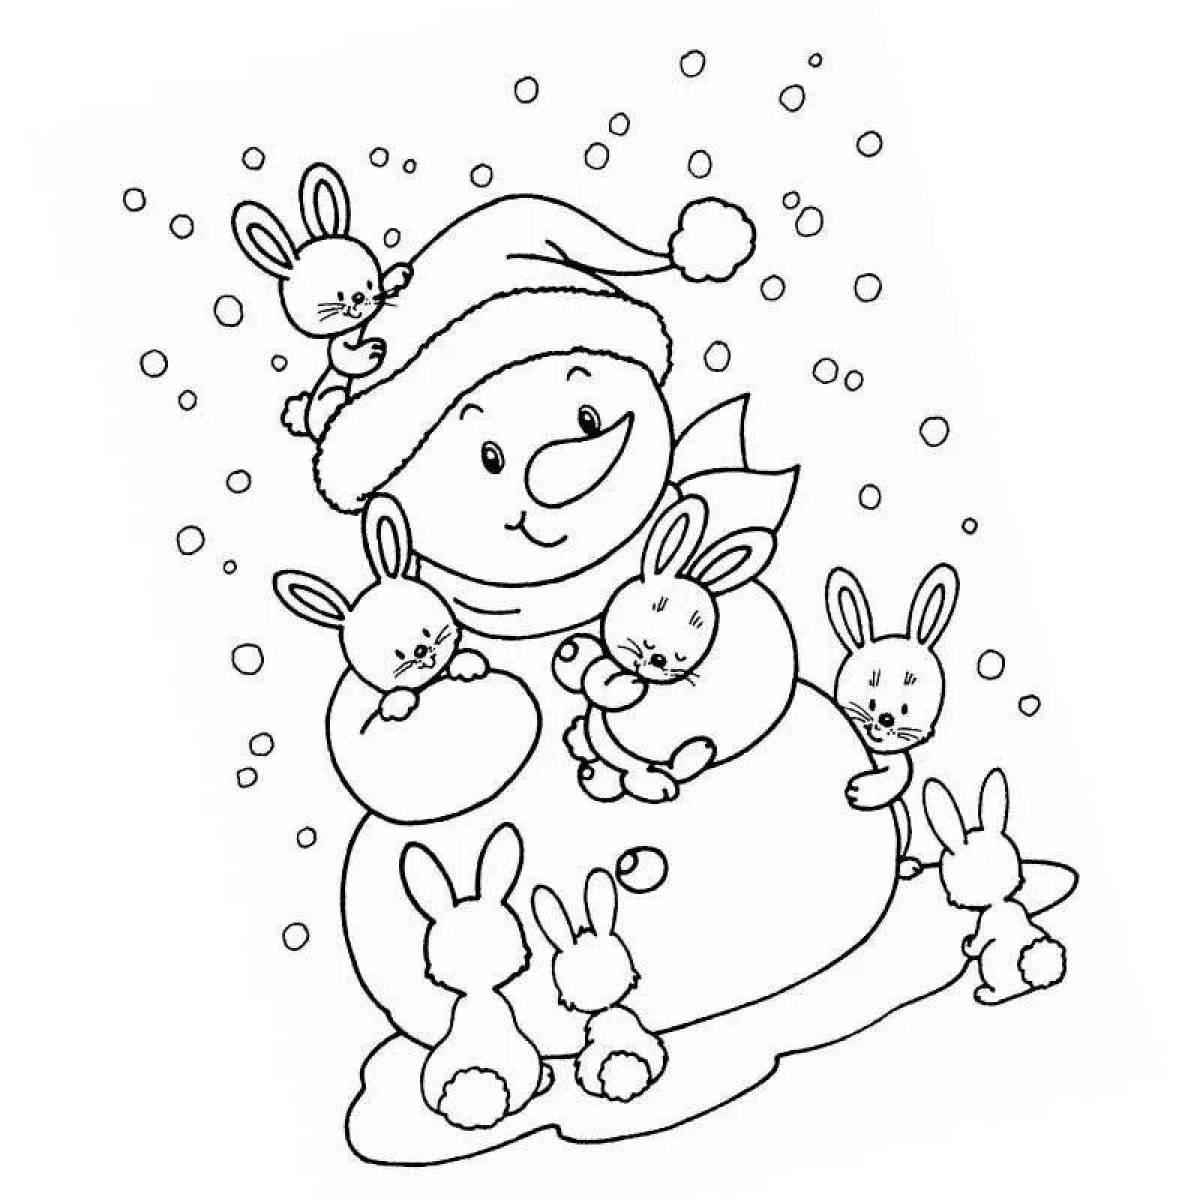 Color-frenzy coloring page bunny new year